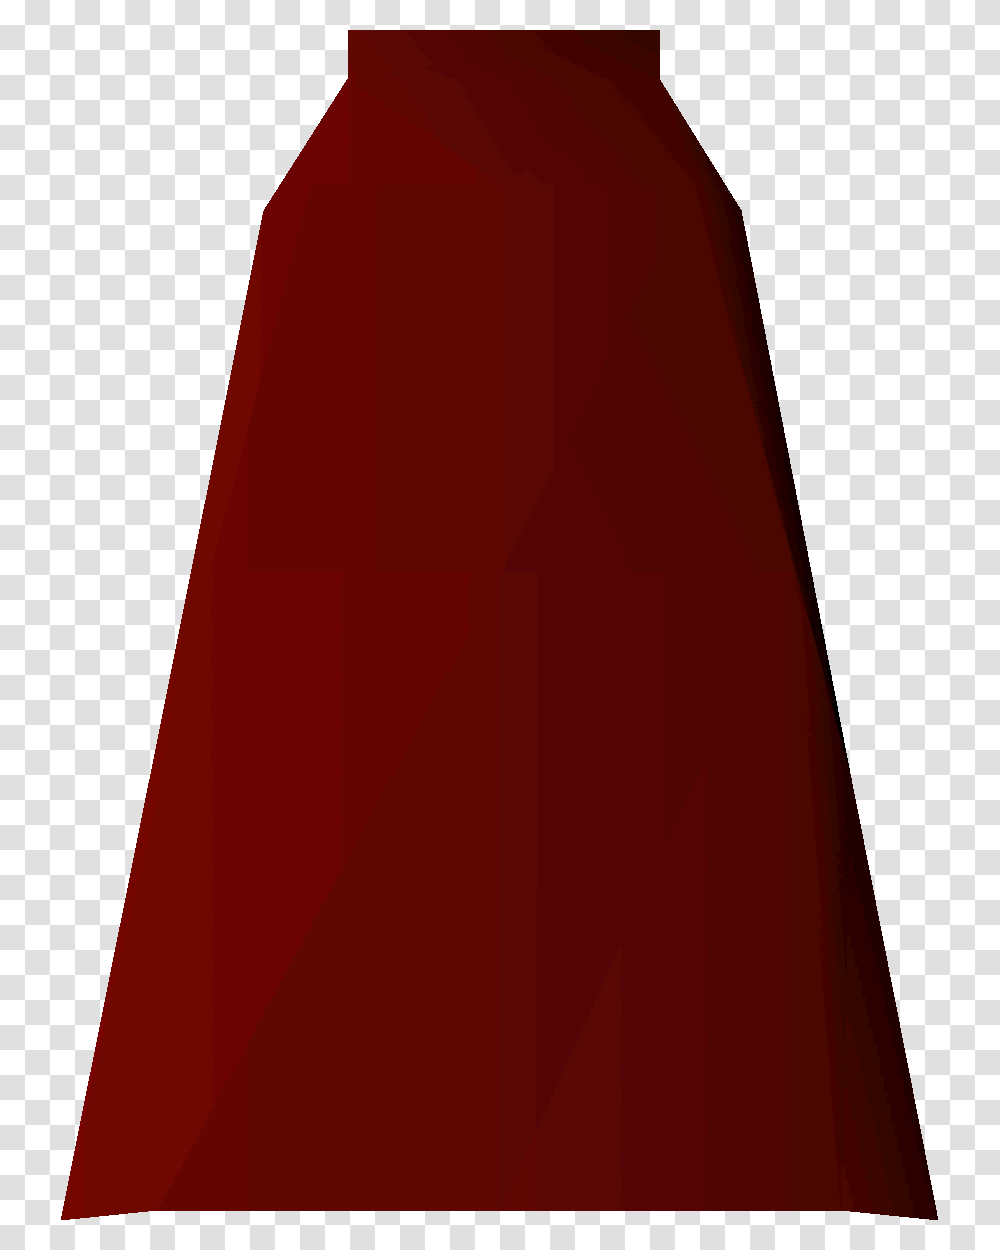 Old School Runescape Wiki, Apparel, Fashion, Cowbell Transparent Png